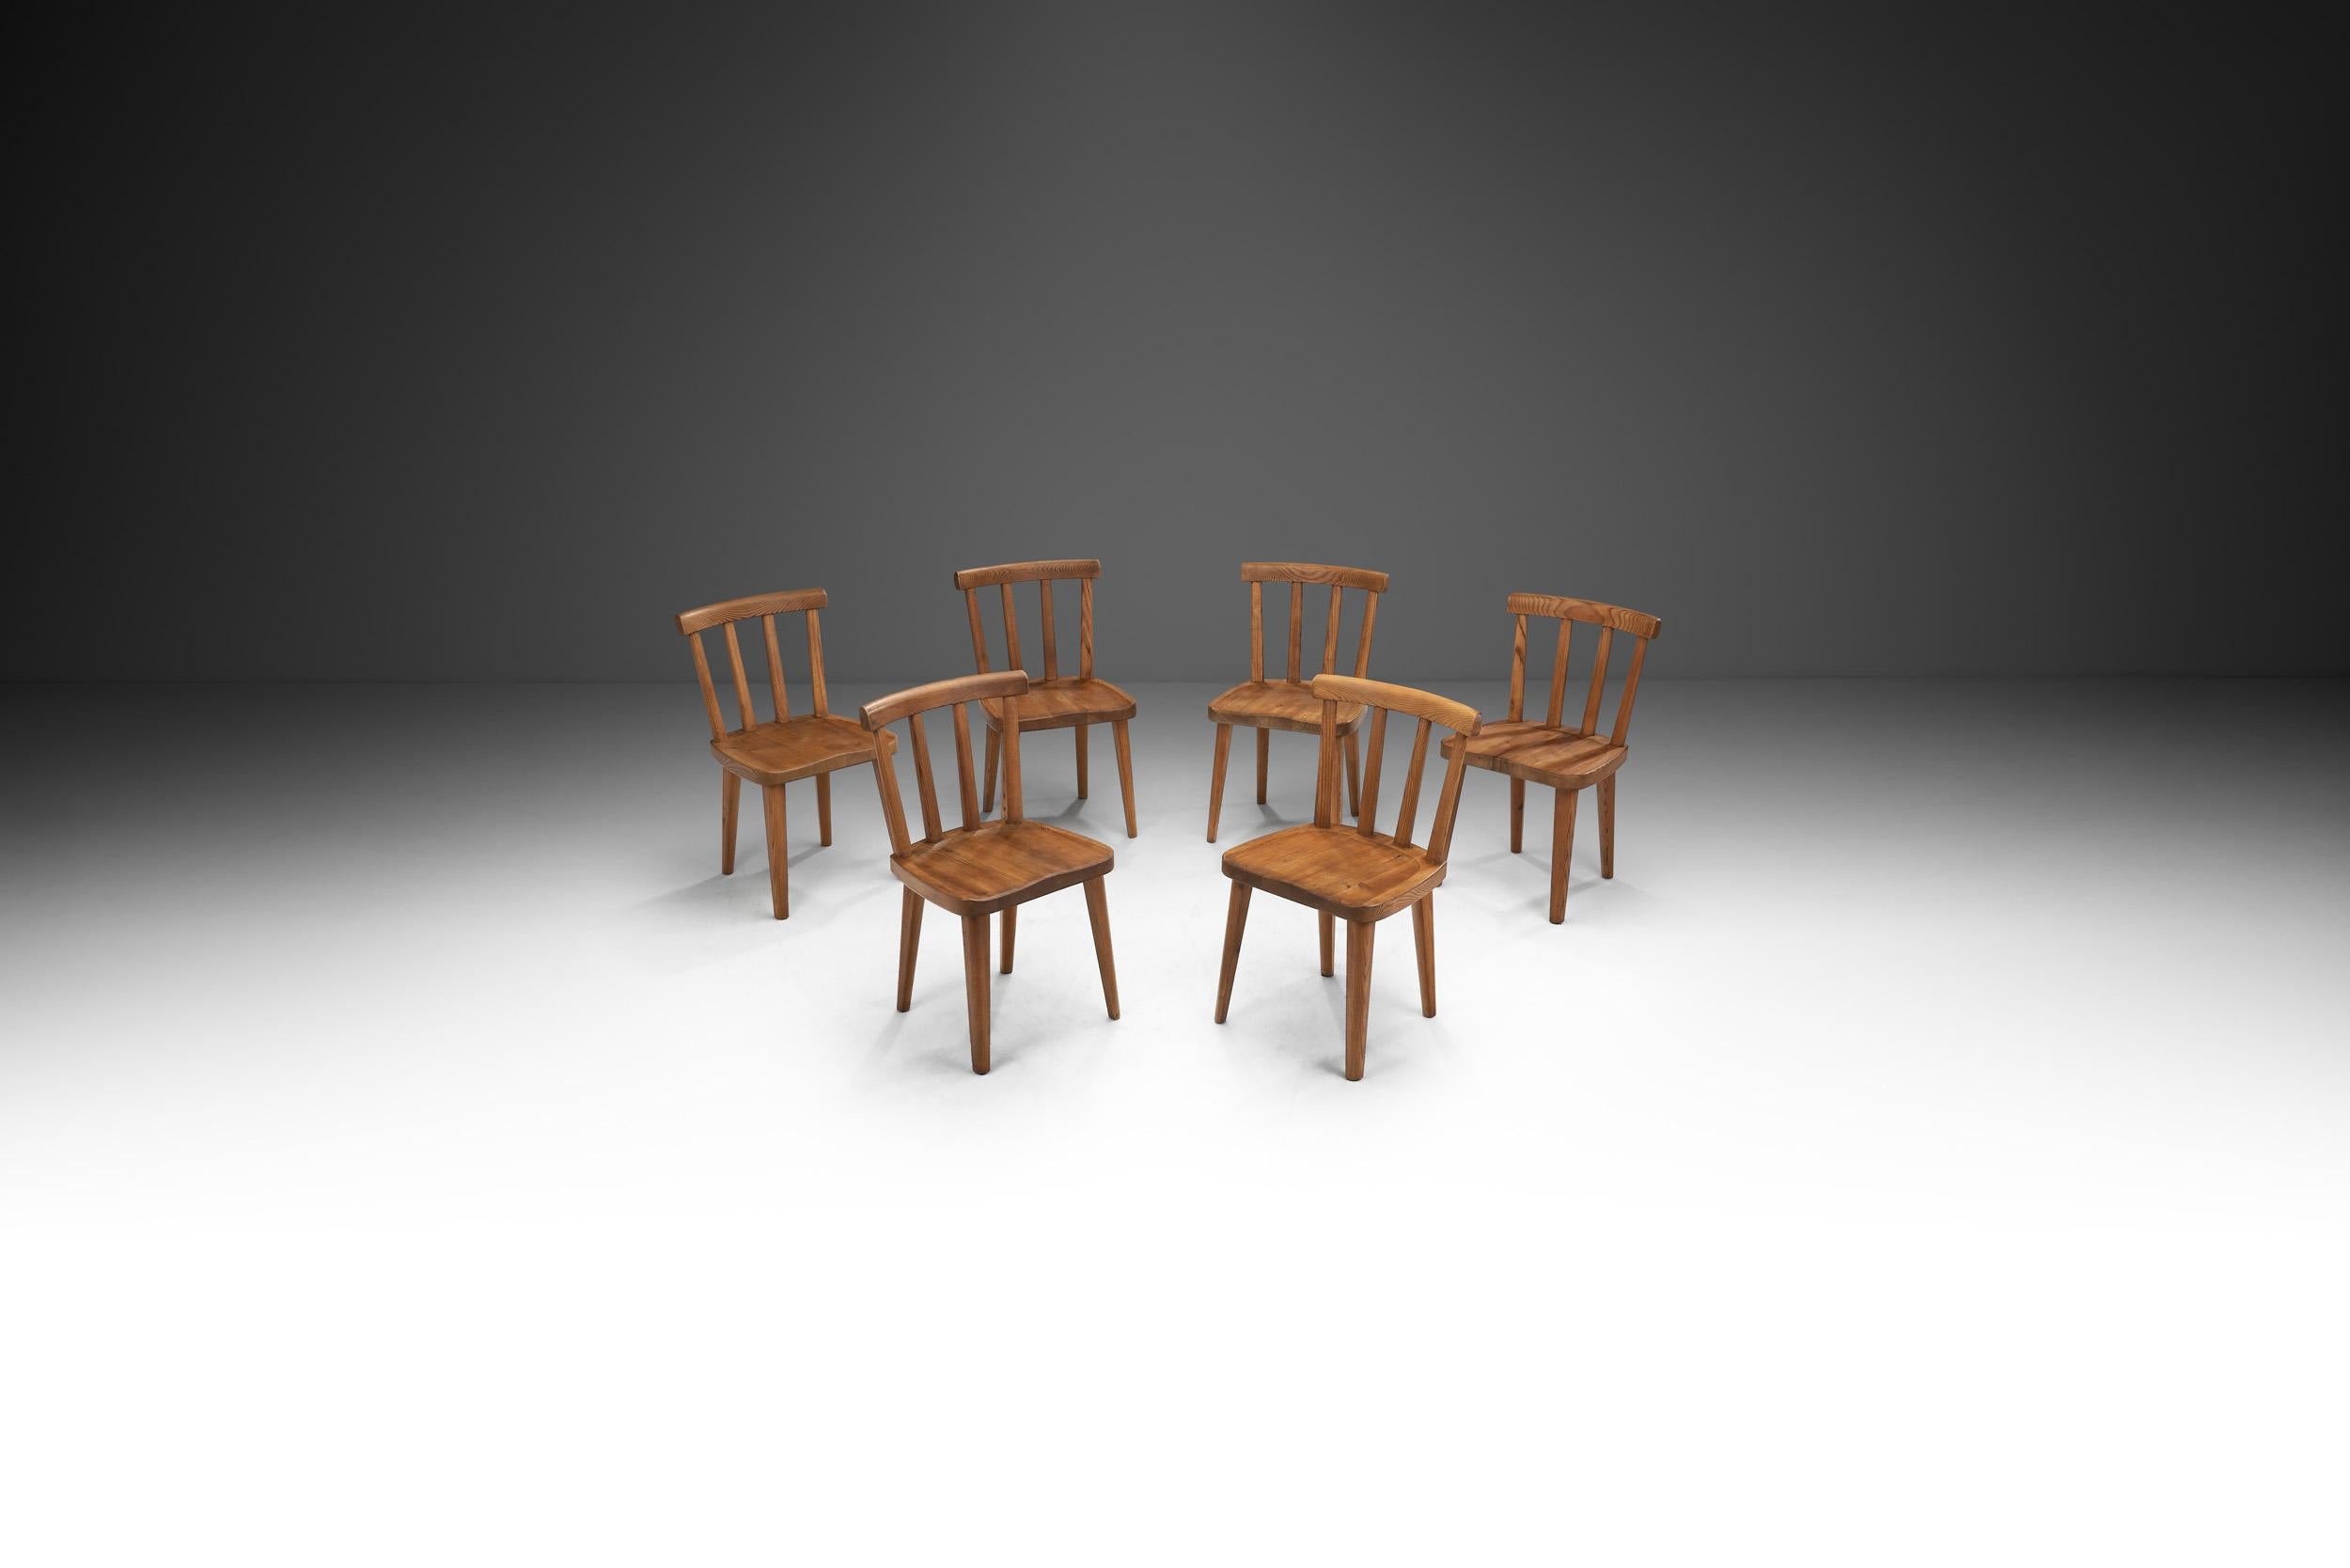 1930s chair styles